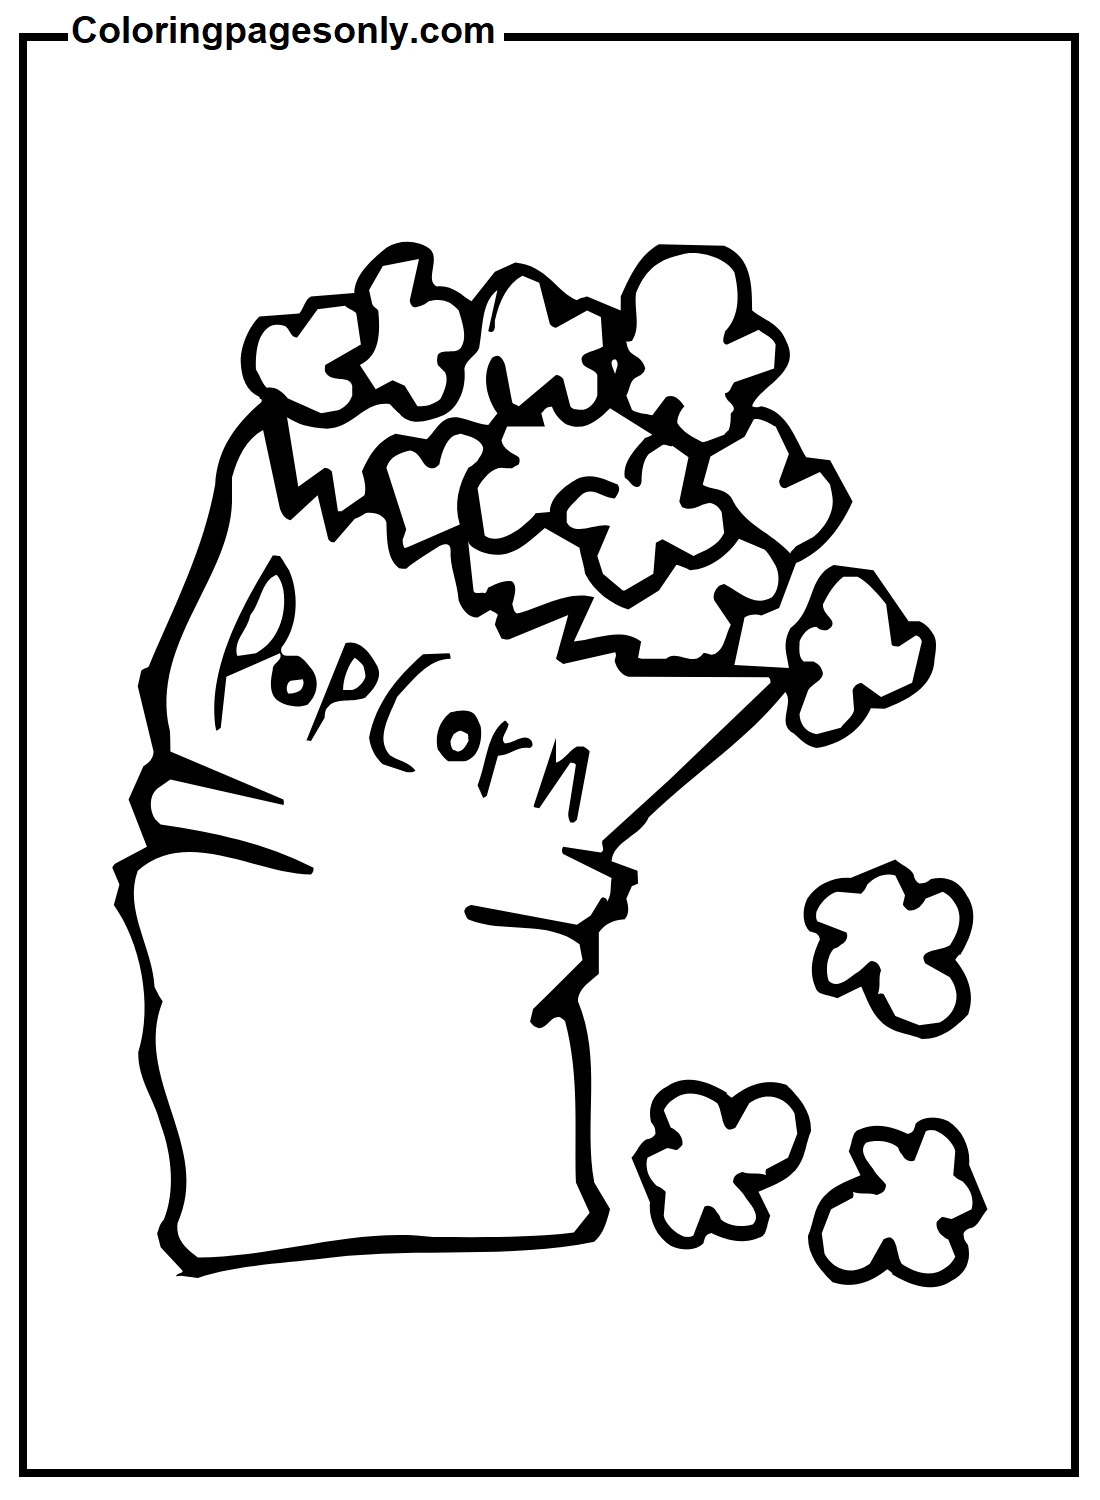 Printable Popcorn Coloring Pages